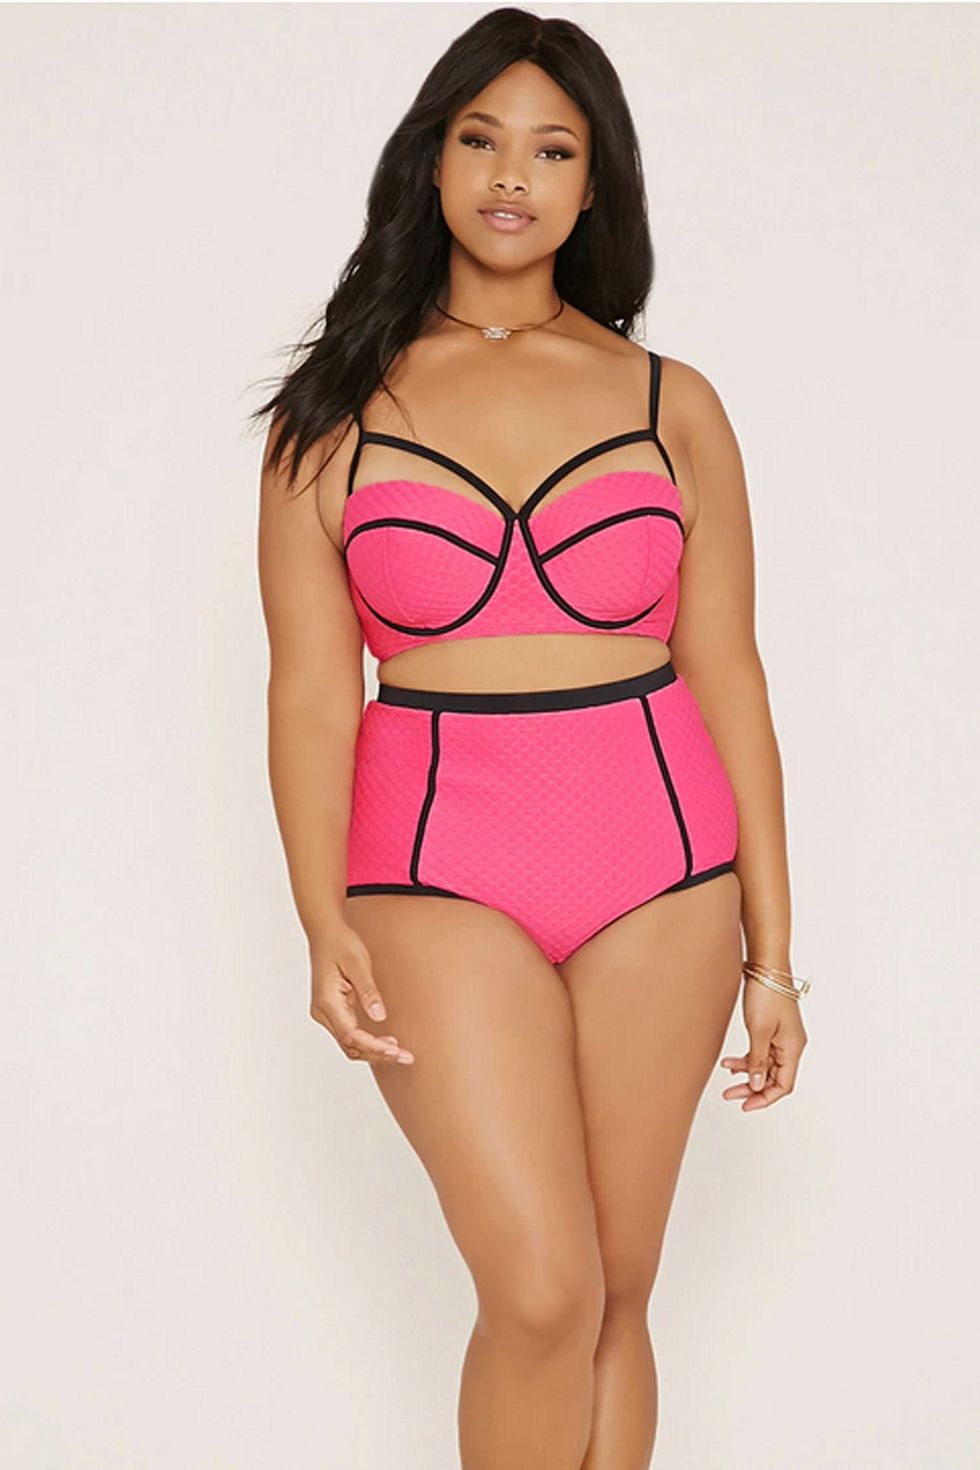 Best New Swimsuits for Women With Curves